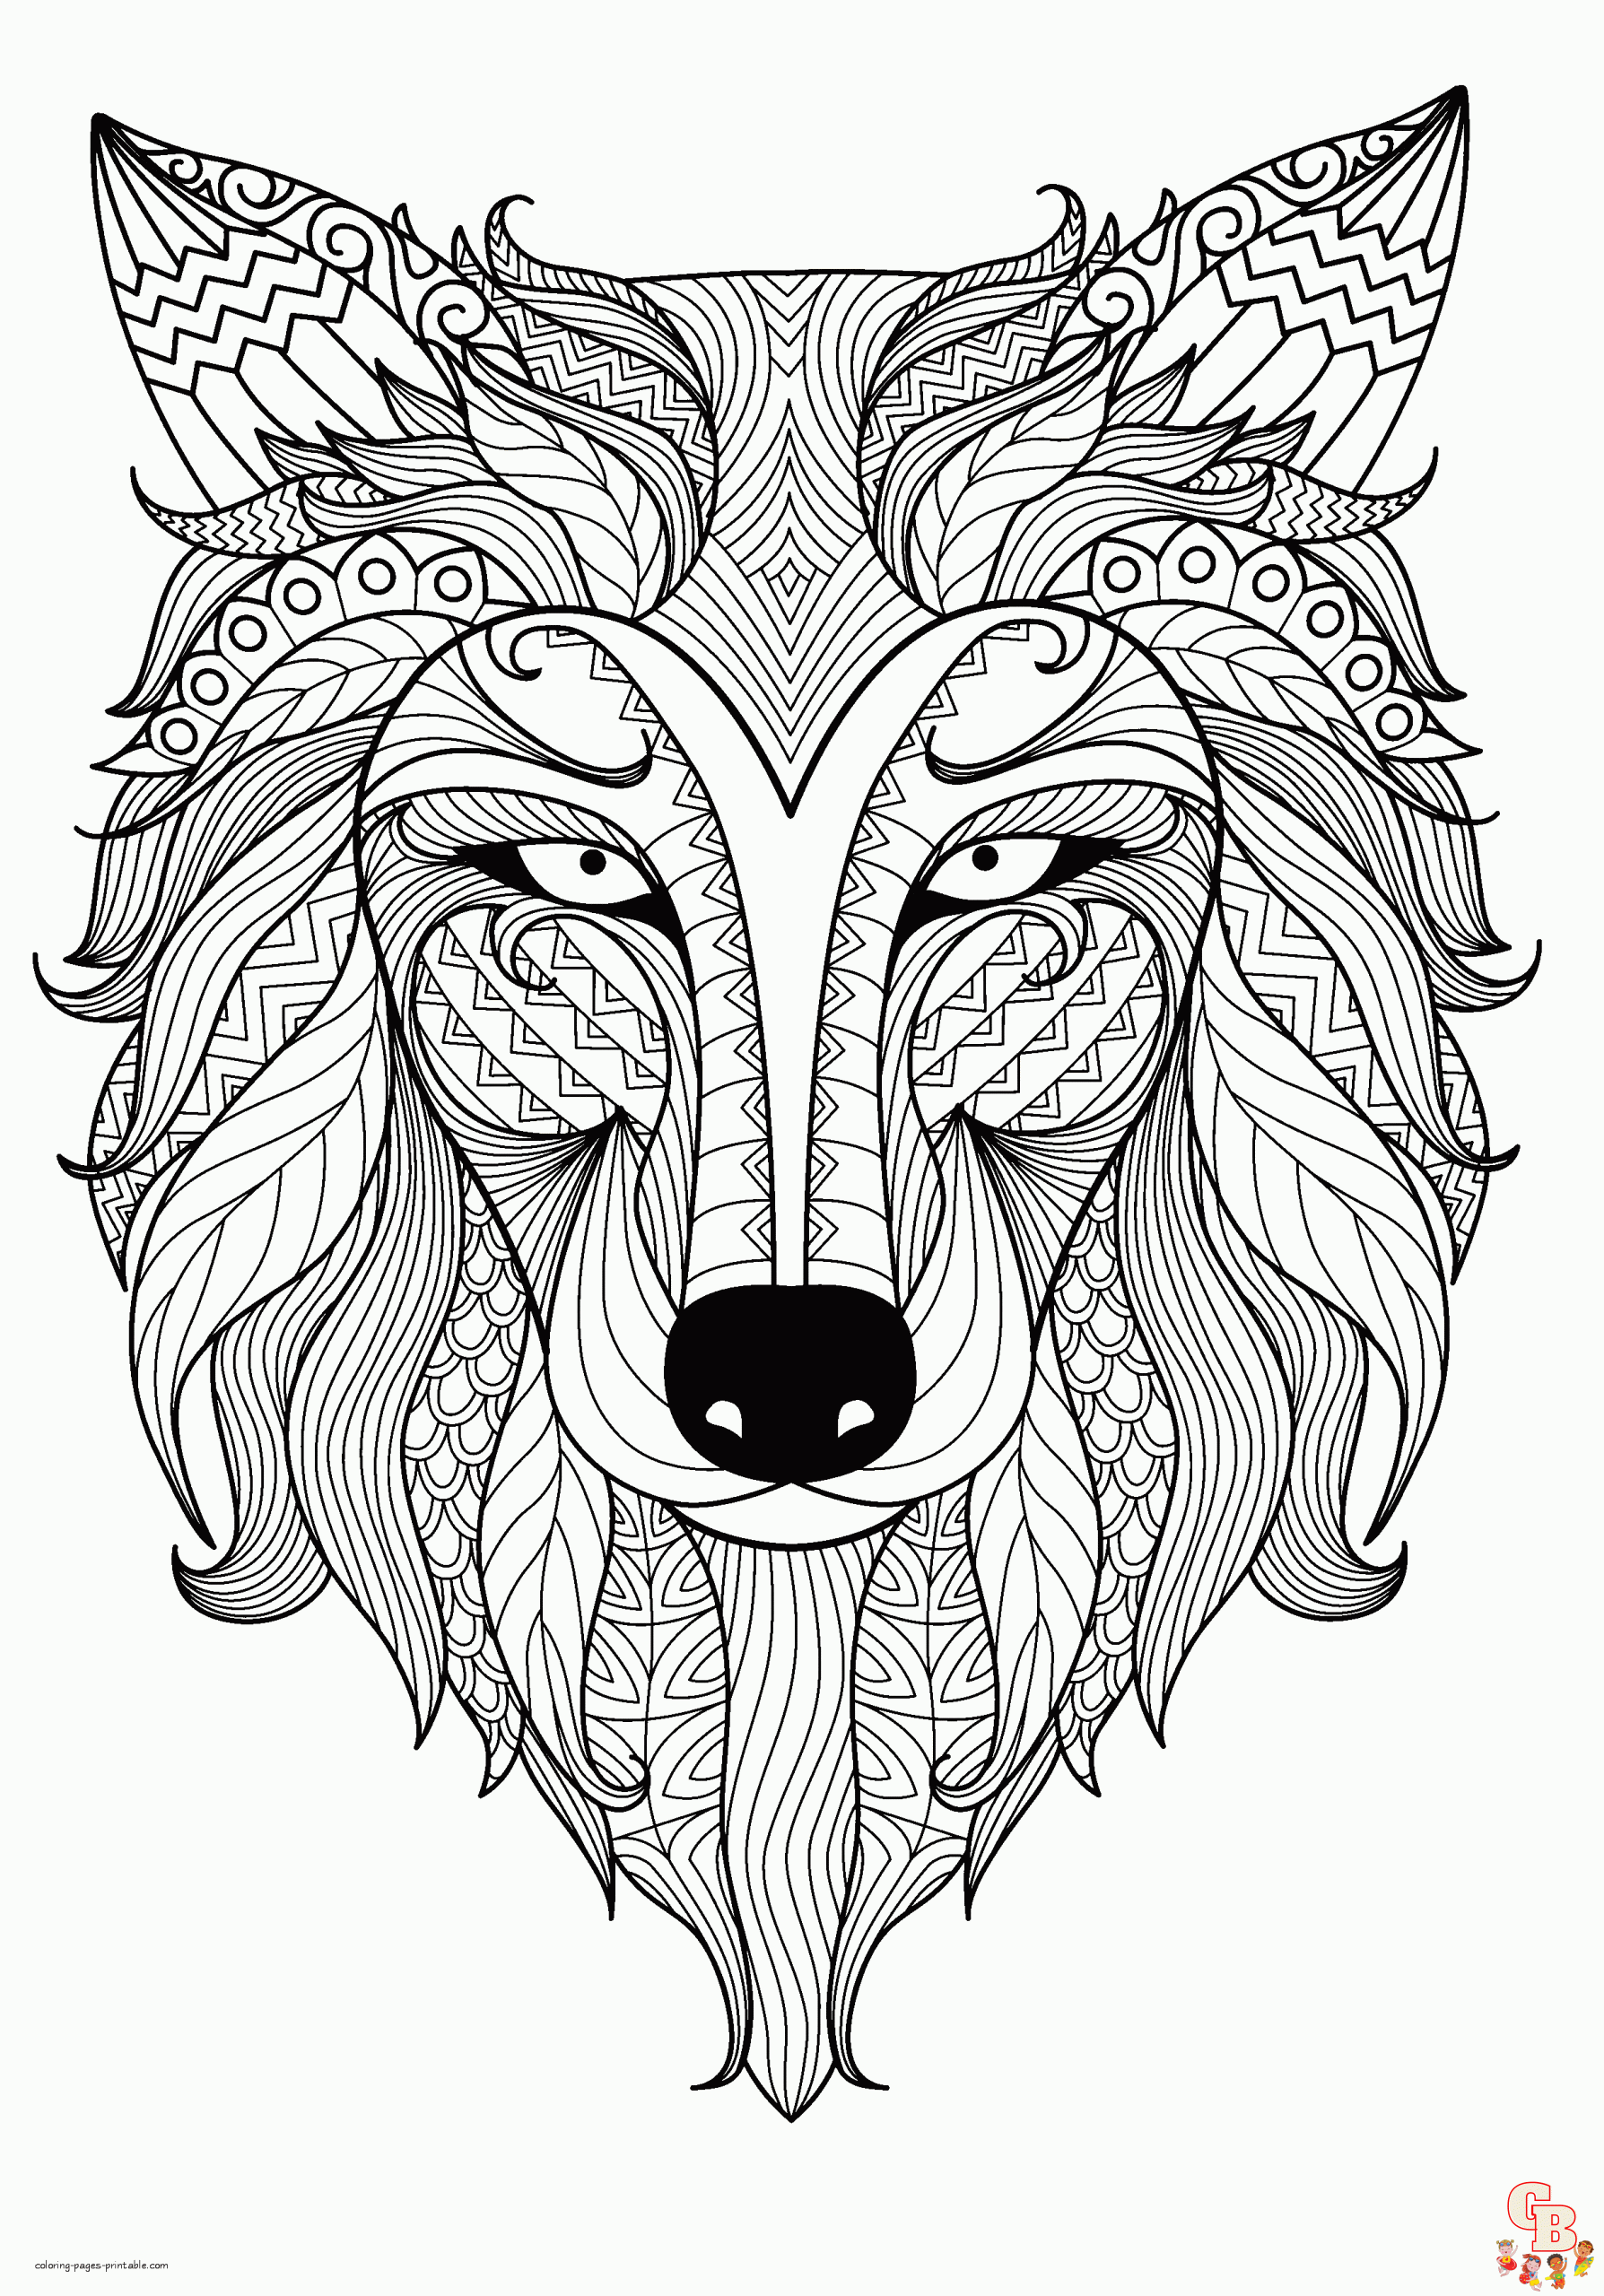 Awesome Animals adult Coloring Pages, Coloring Pages Printable, Coloring  Book Printable, Stress Relieving, Relaxing -  Norway